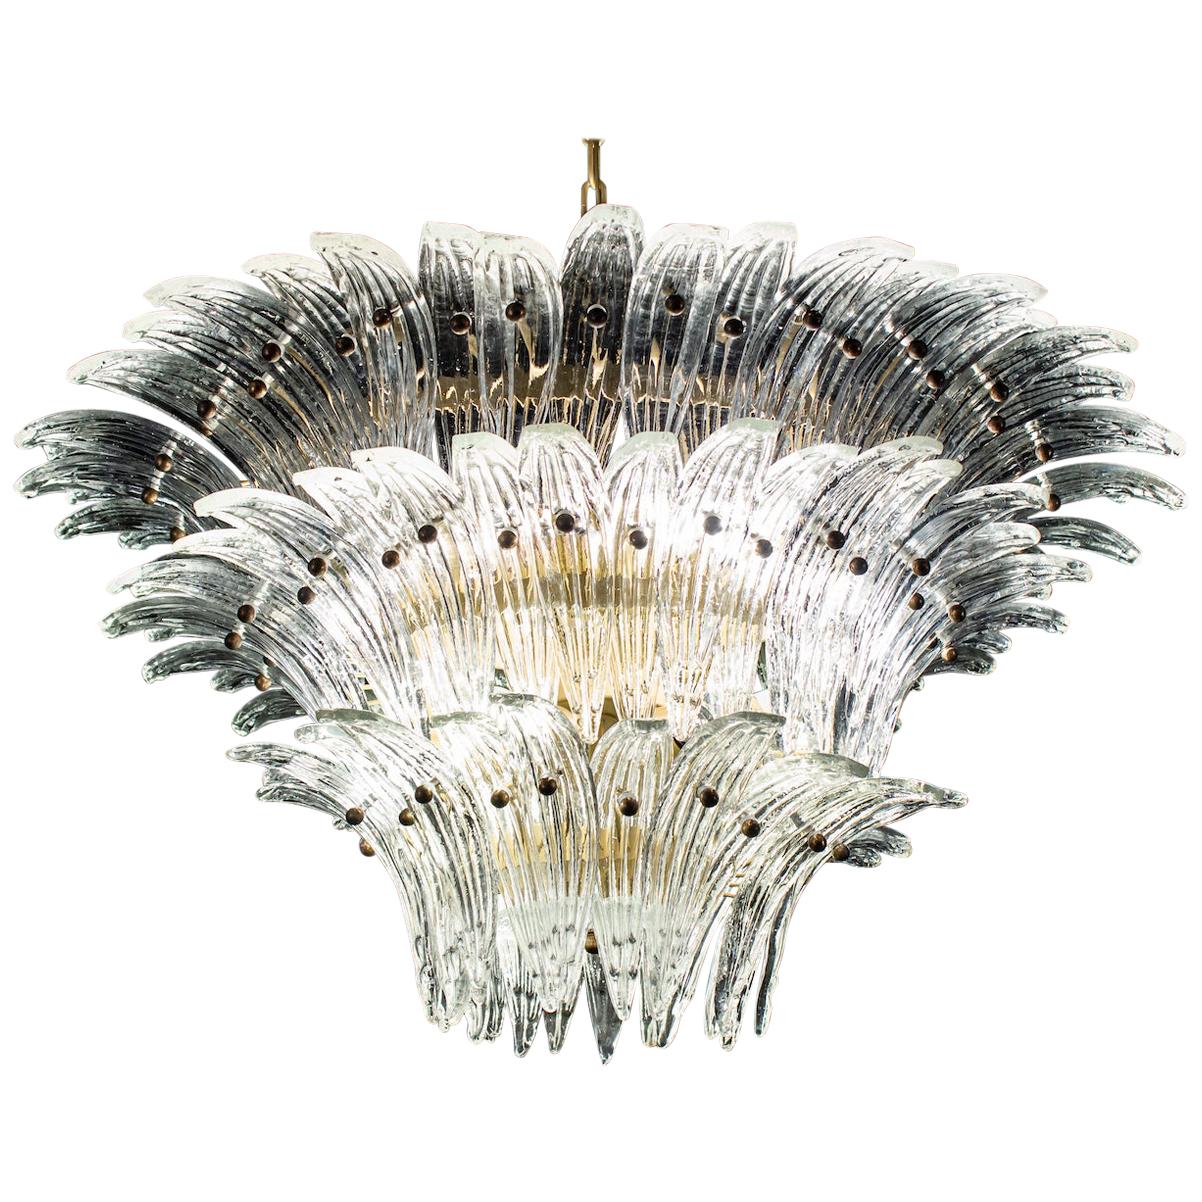 Luxury Palmette Murano glass chandelier made with 94 original crystal glasses attributed to Barovier & Toso.
Gold metal frame.
Available also a pair.
12-light bulbs, E27 dimension
Dimensions: Chandelier 43.30 inches (110 cm), height with chain.